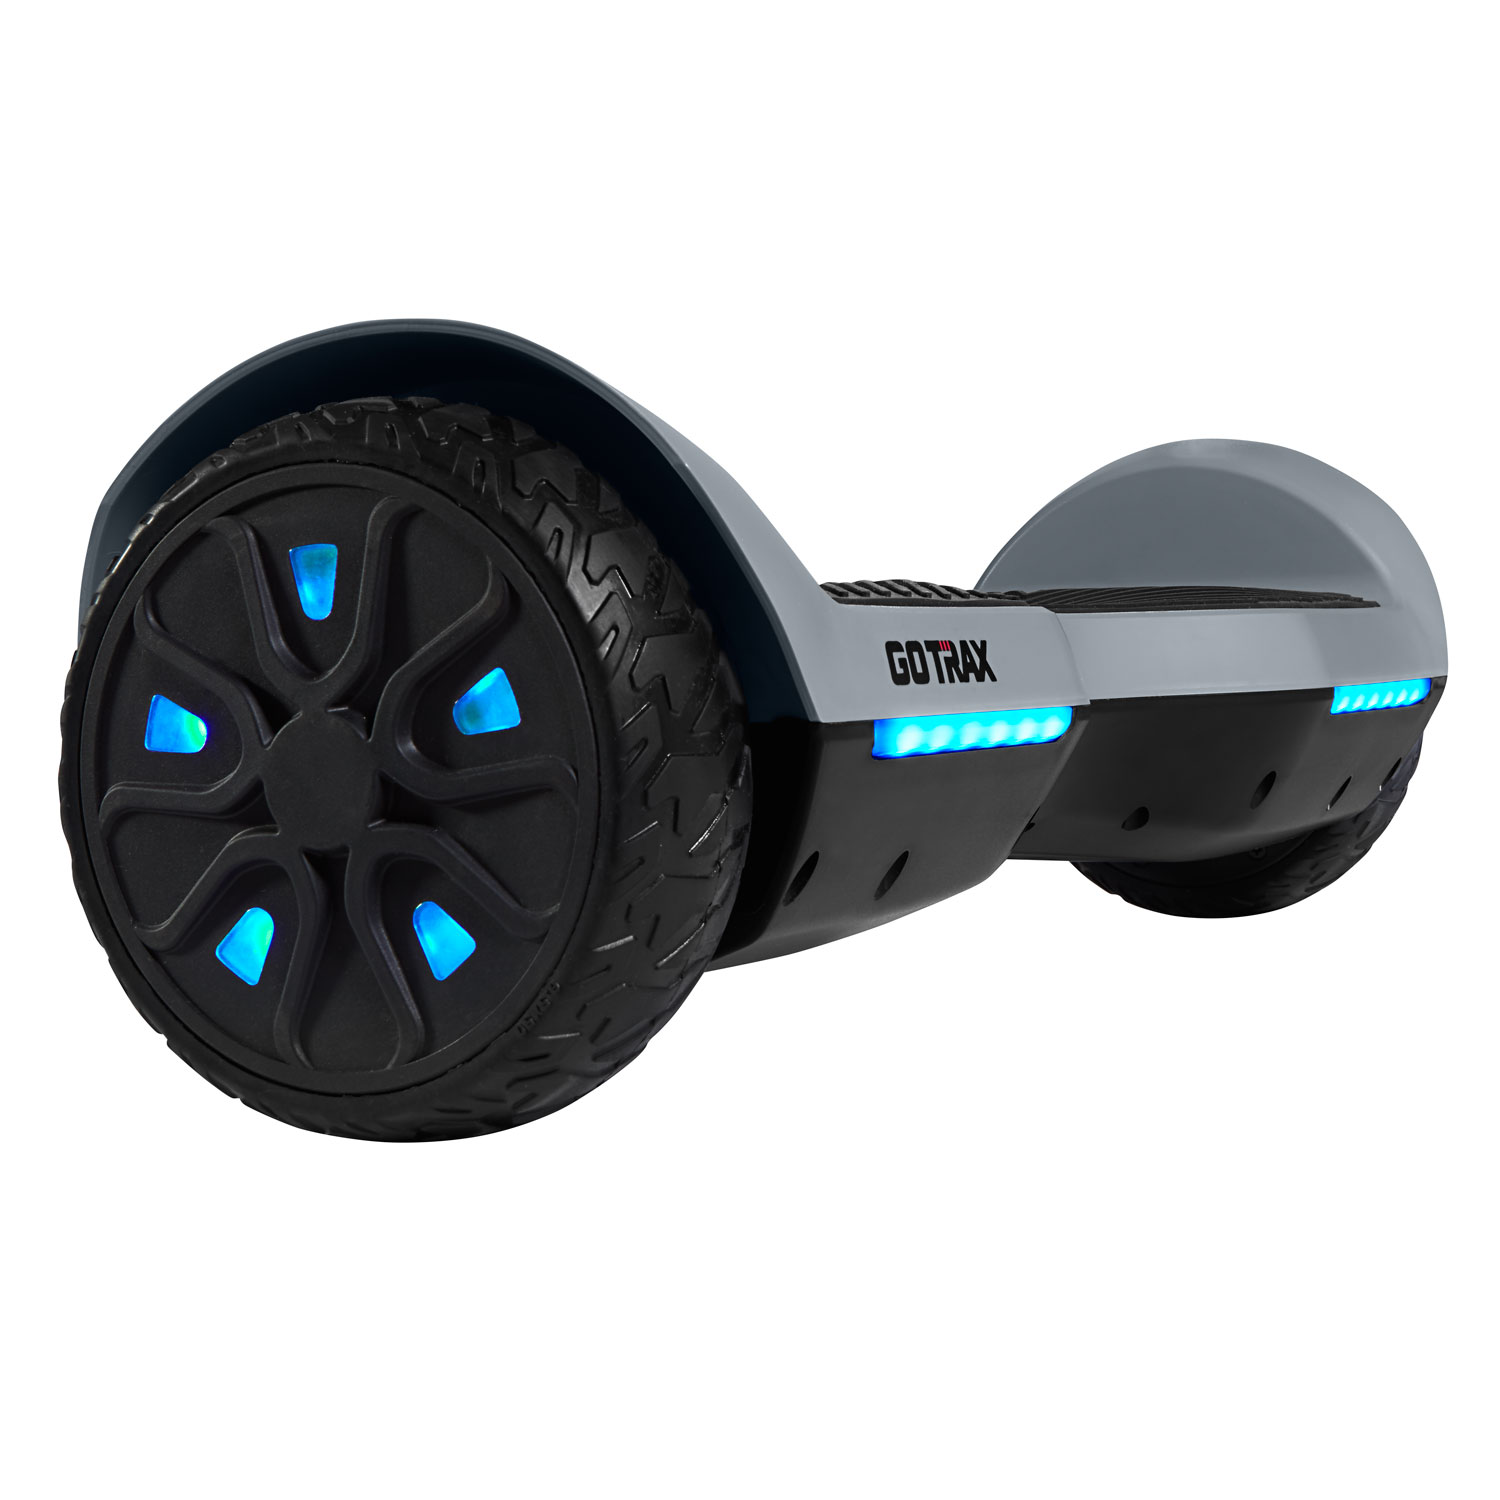 GOTRAX SRX A6 Hoverboard - 6.5 Hover Board w/Bluetooth Speakers & Self Balancing Mode - image 1 of 9